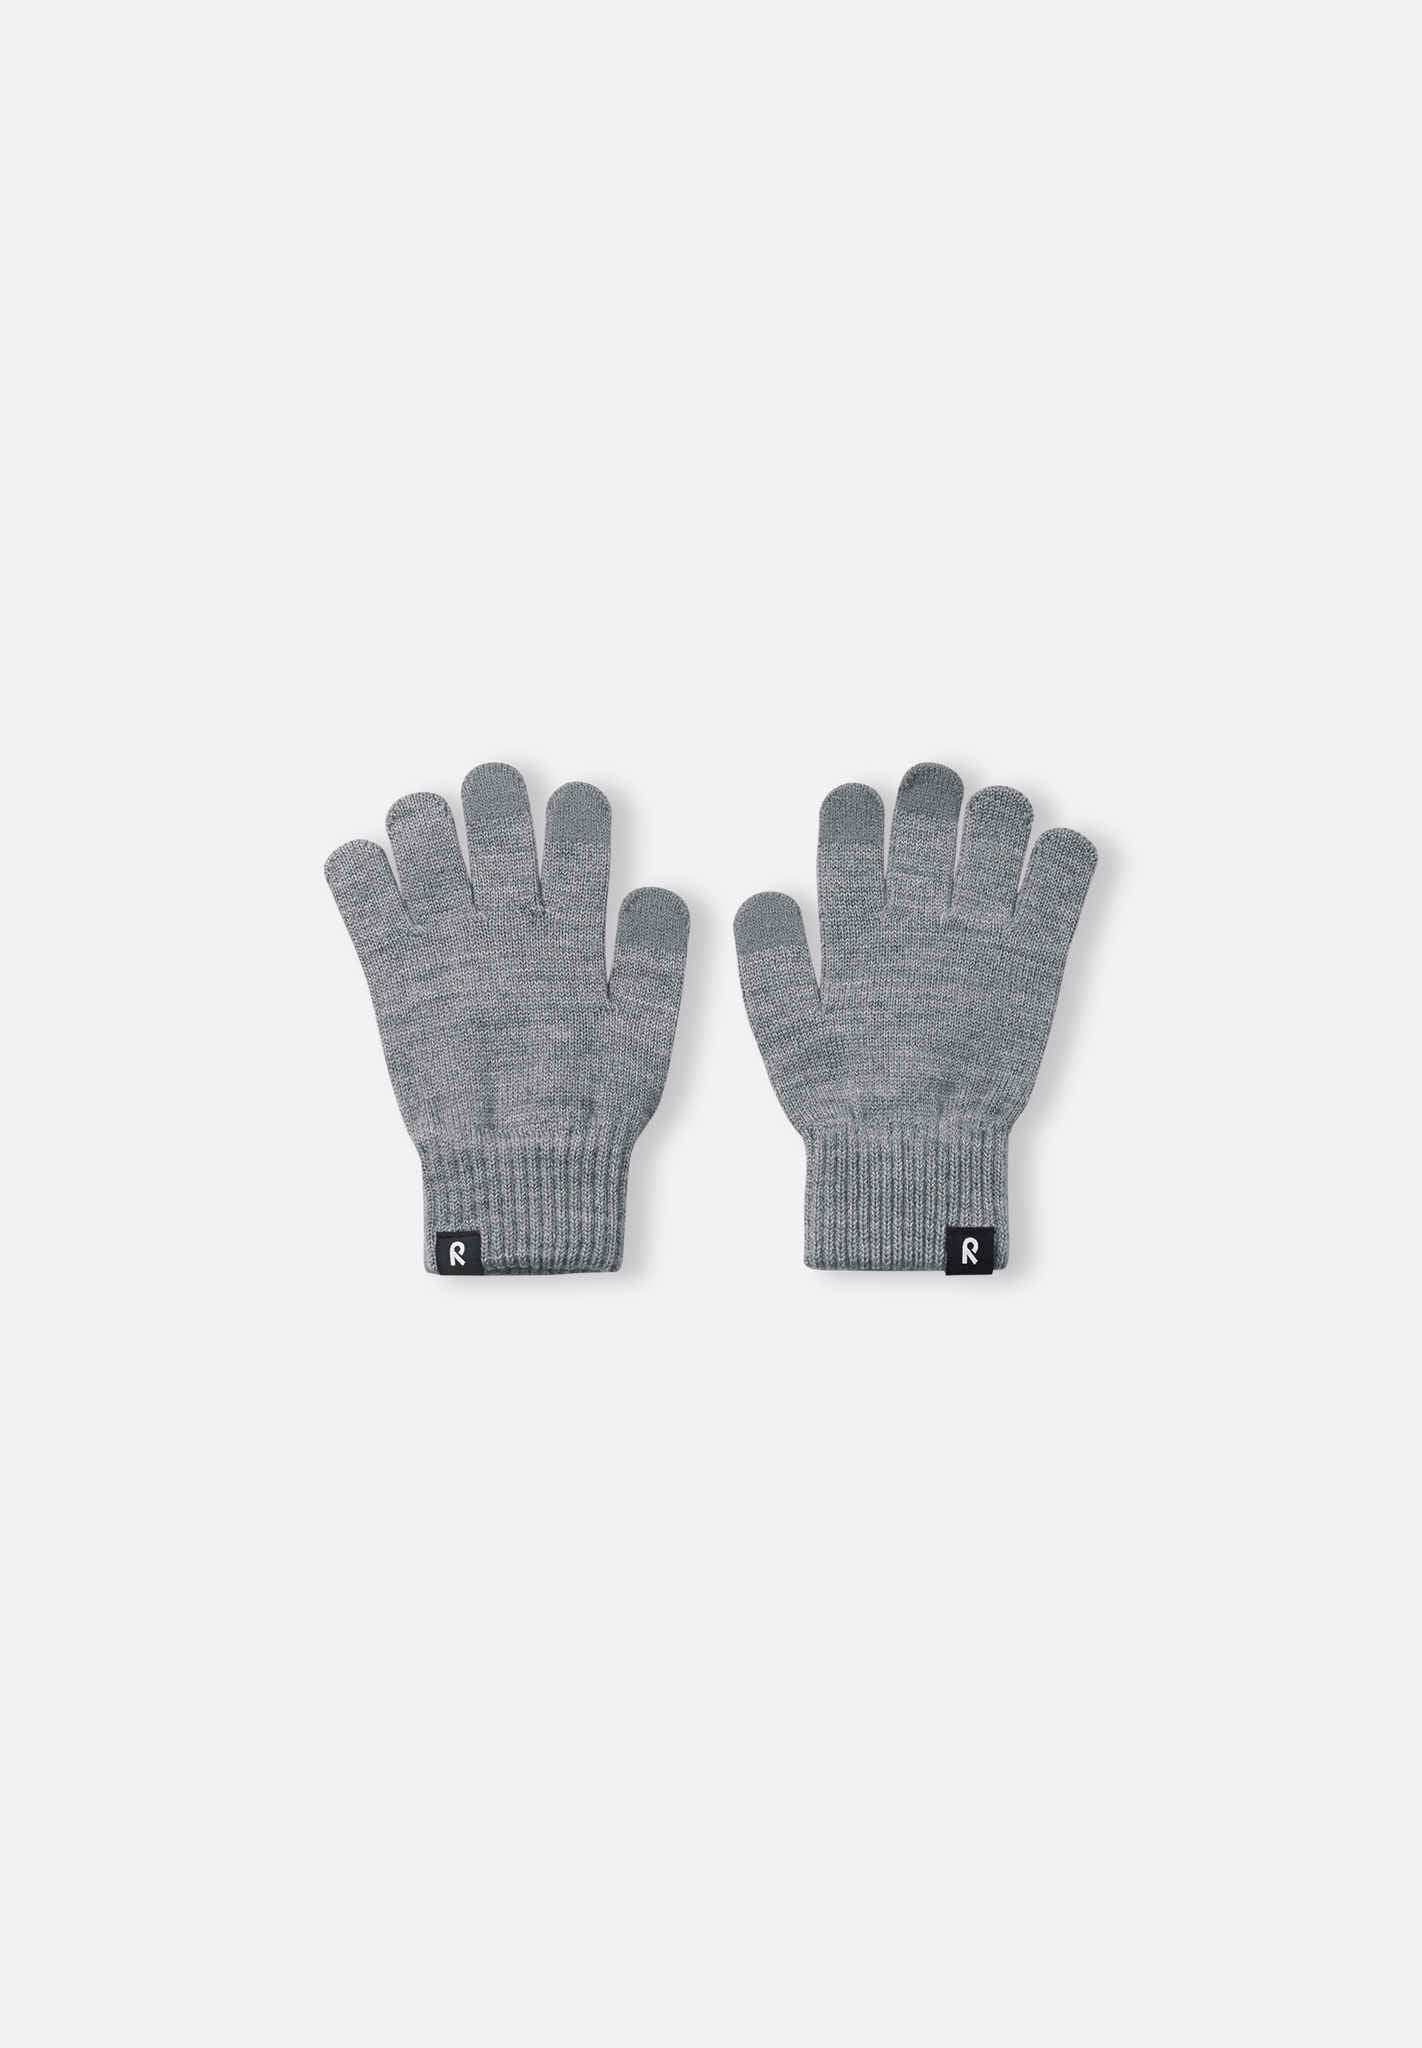 Reima Wool Blend Knitted Gloves - Rimo Grey